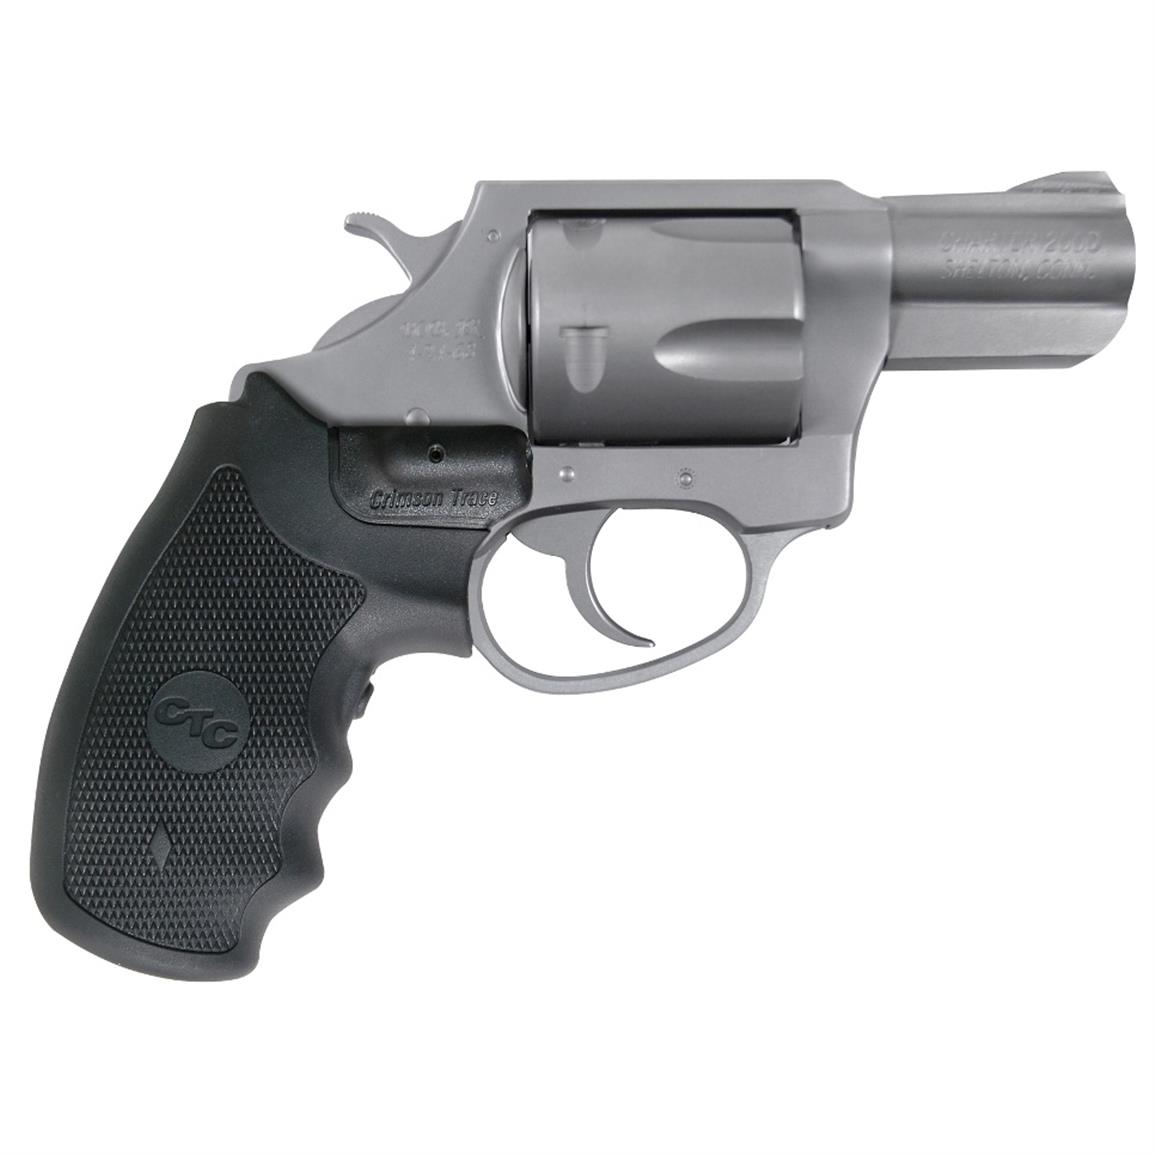 Charter Arms Crimson Mag Pug, Revolver, .357 Magnum, 73524, 678958735246, with Crimson Trace Lasergrips